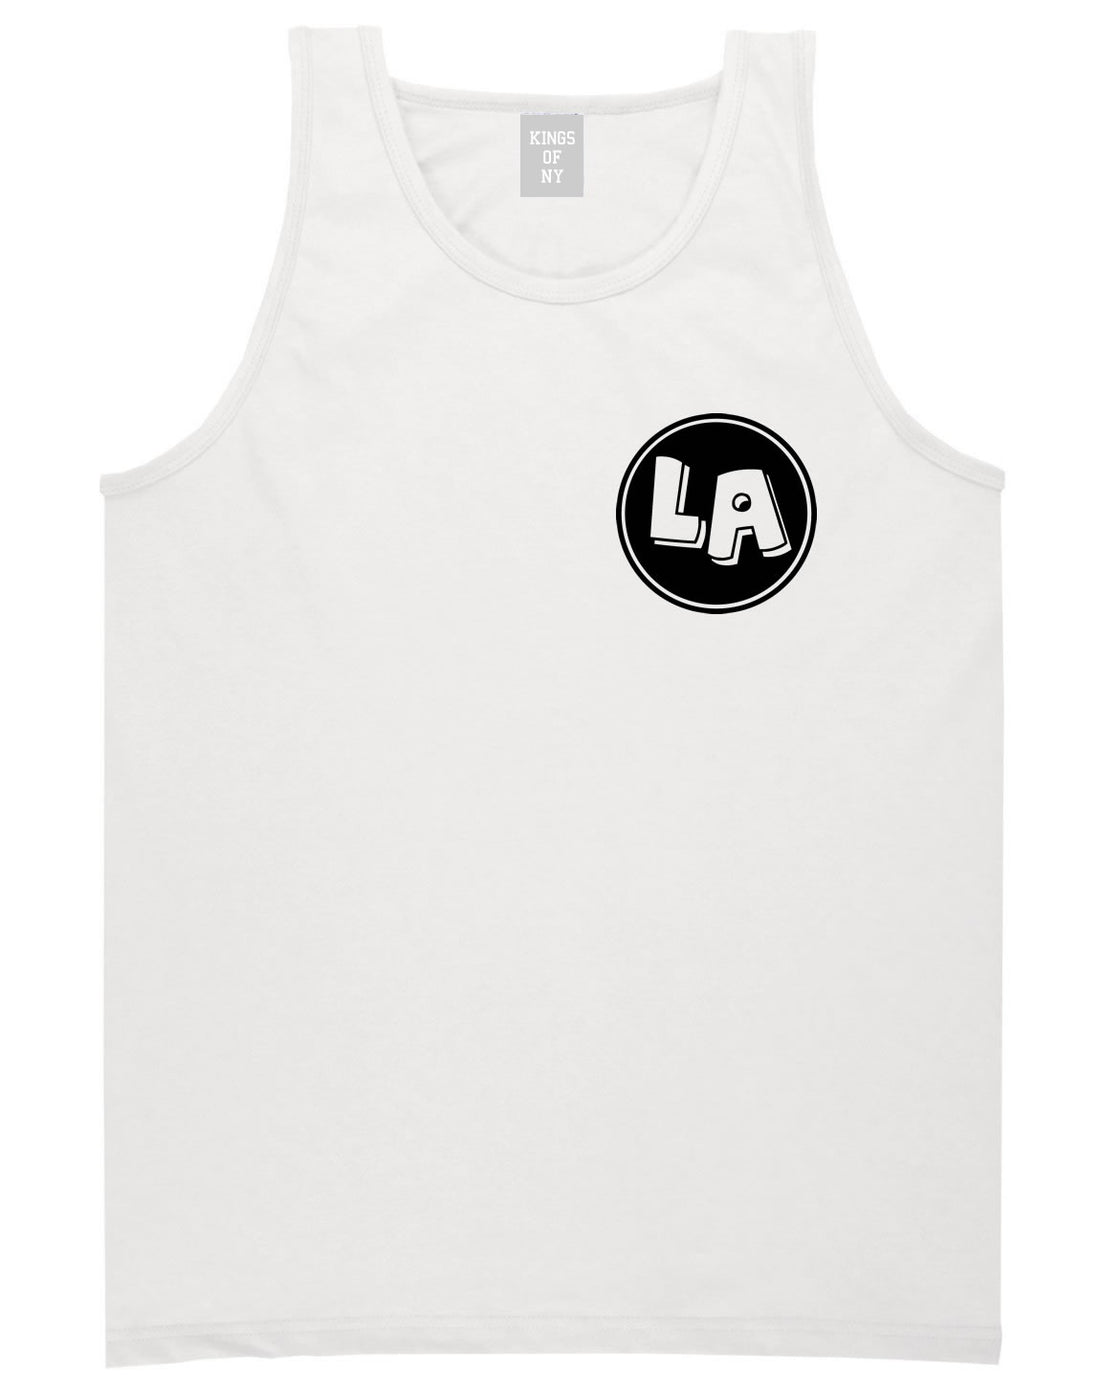 LA Circle Chest Los Angeles Tank Top in White By Kings Of NY